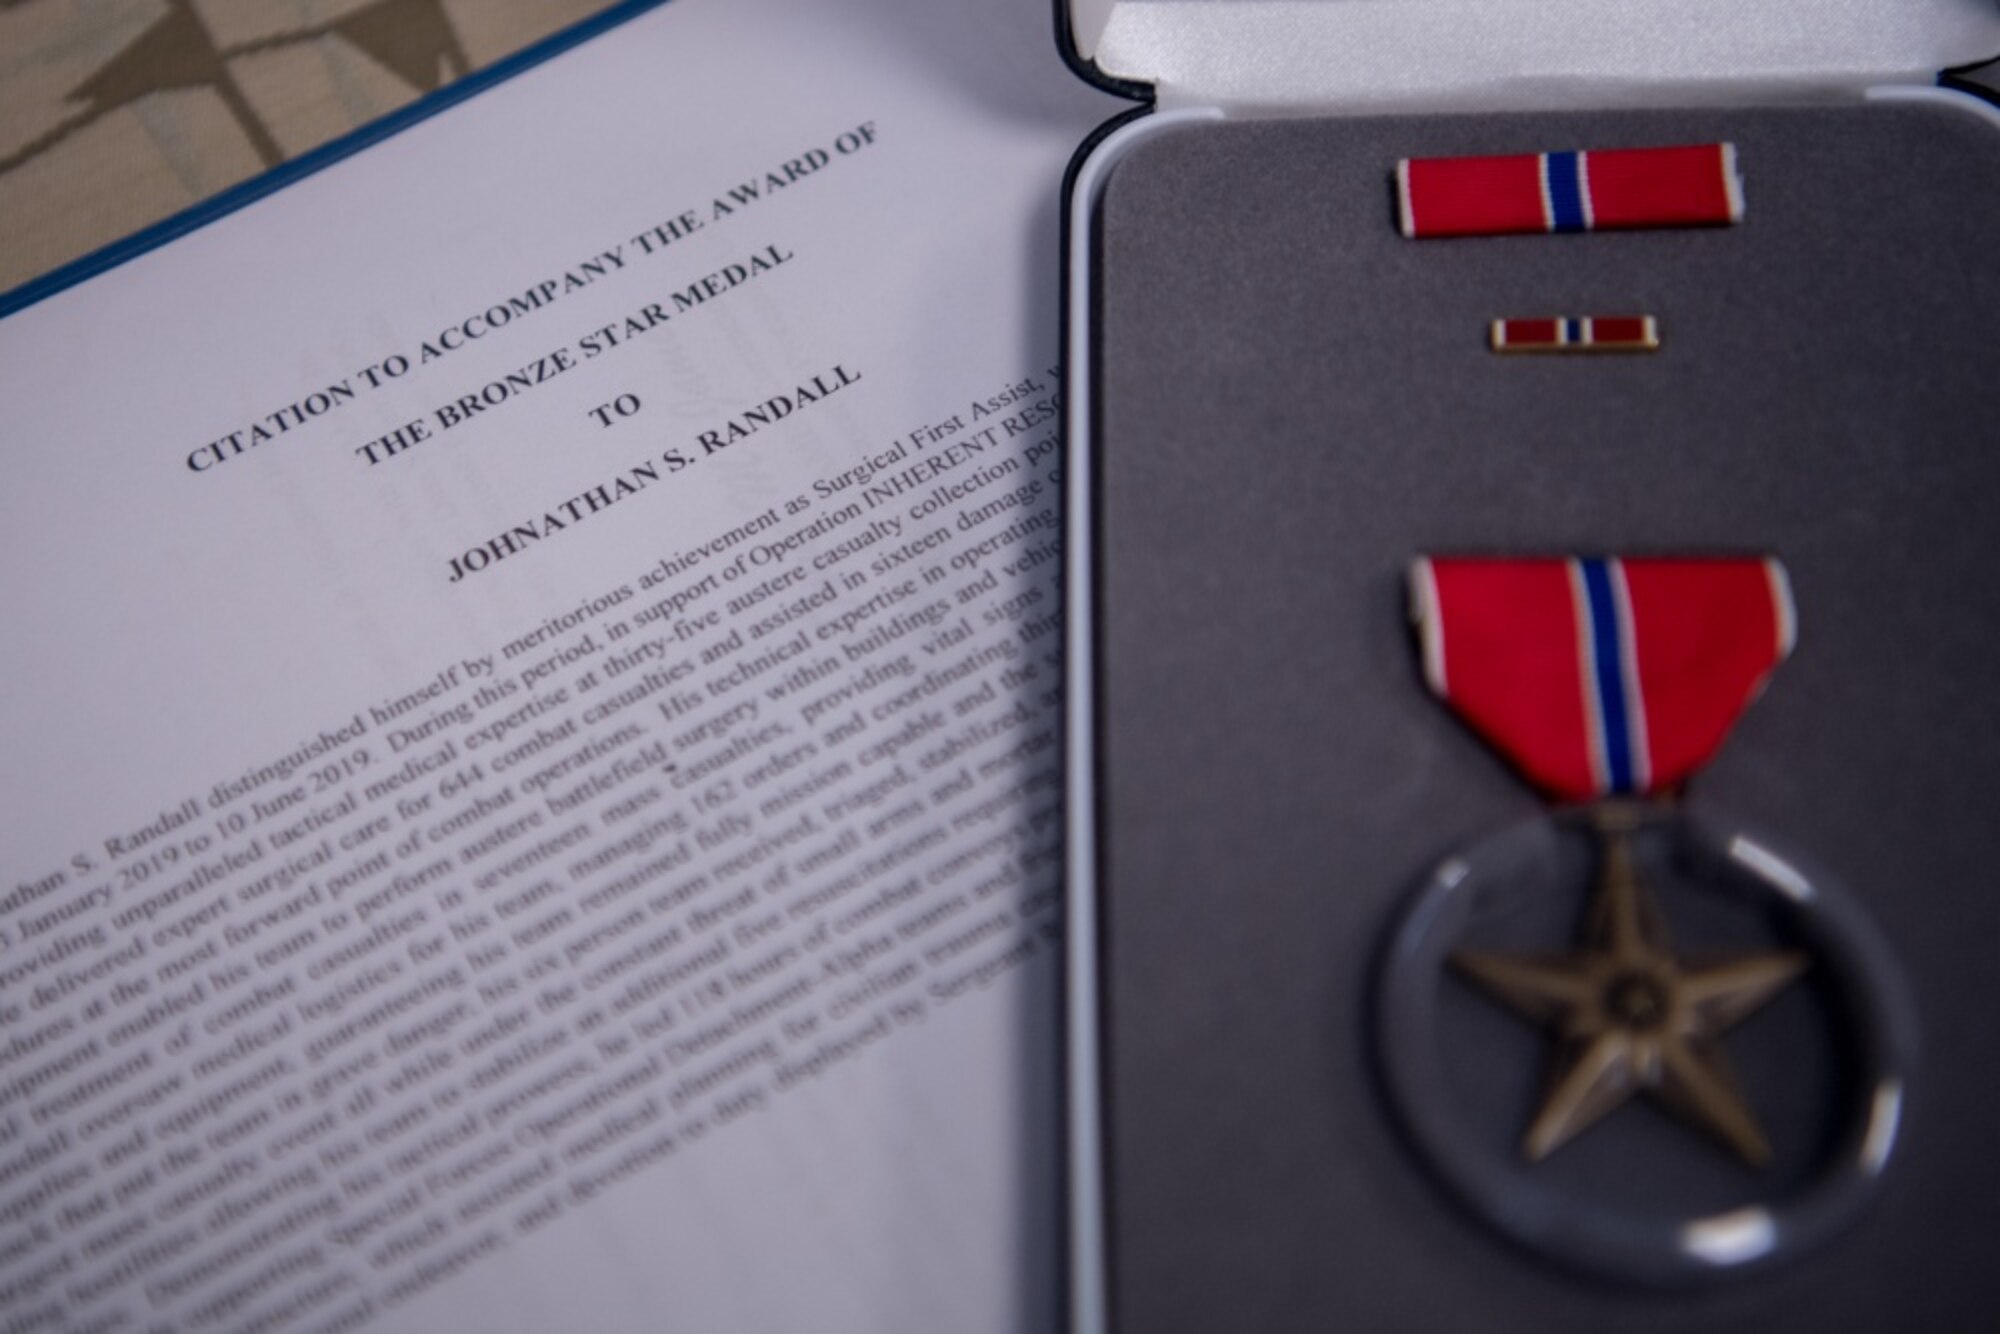 An awards decoration and Bronze Star medal lay on a table